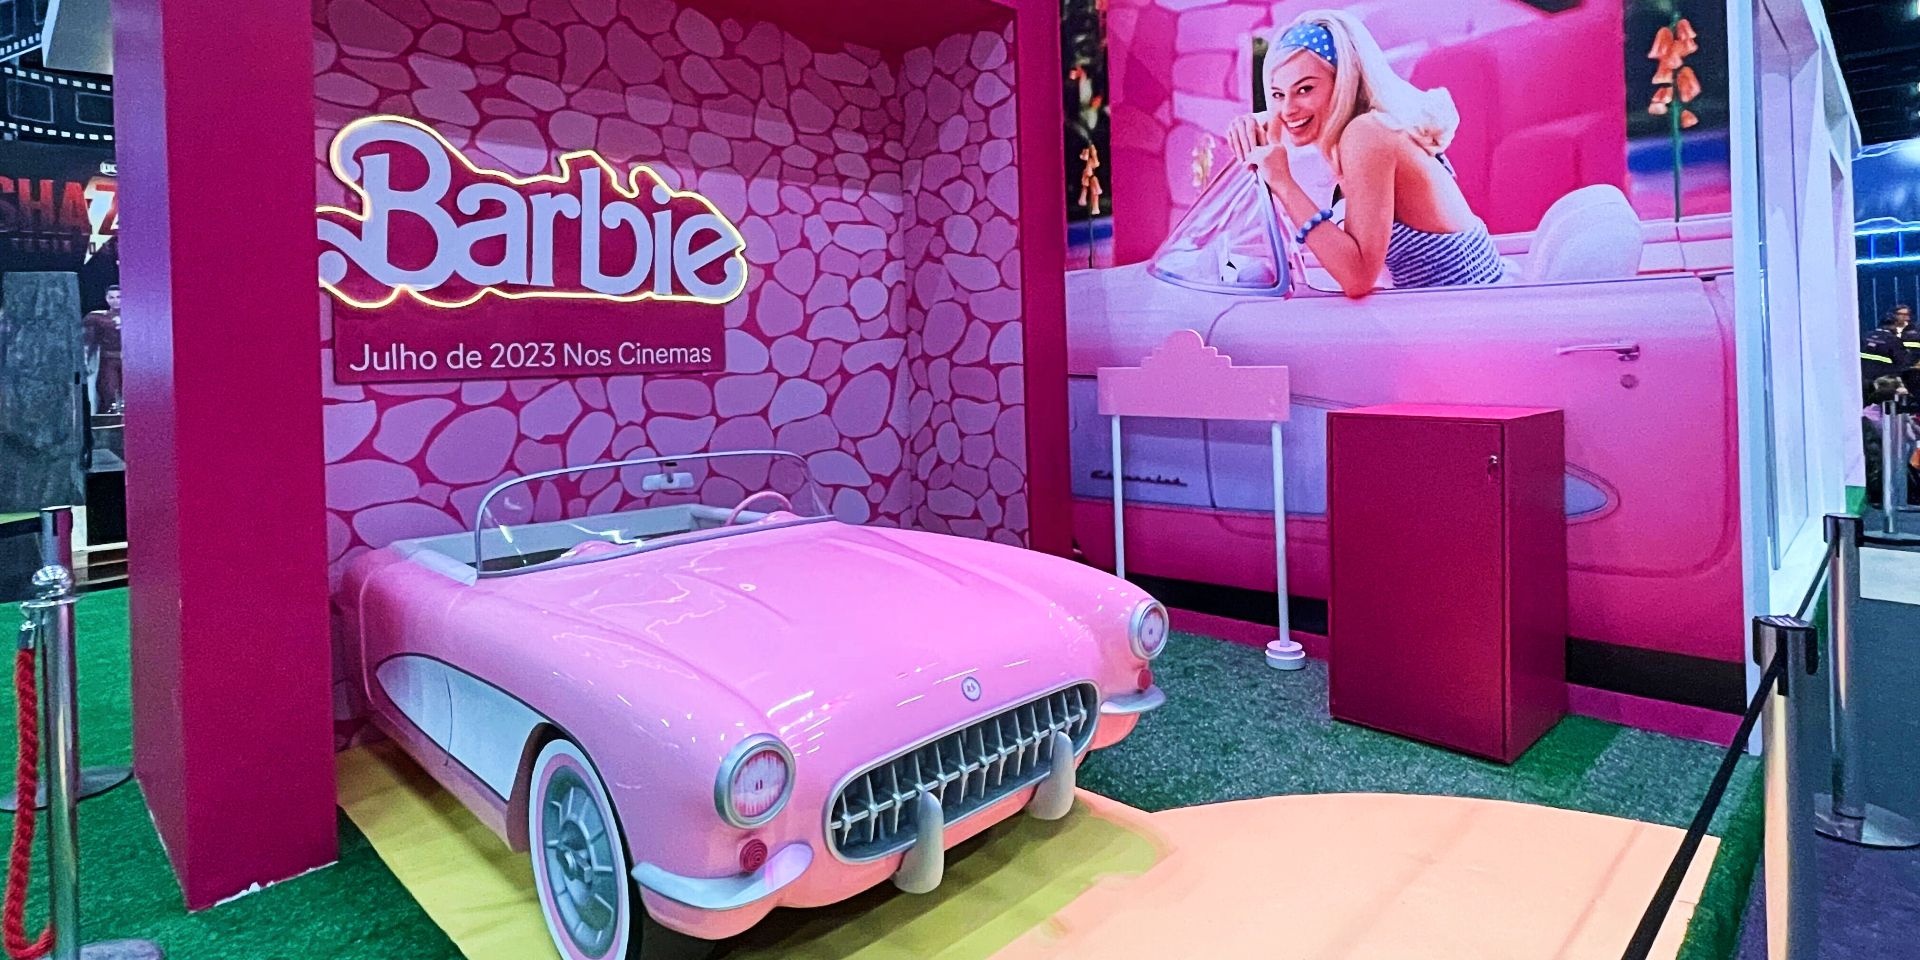 A photo of the Barbie movie CCXP display